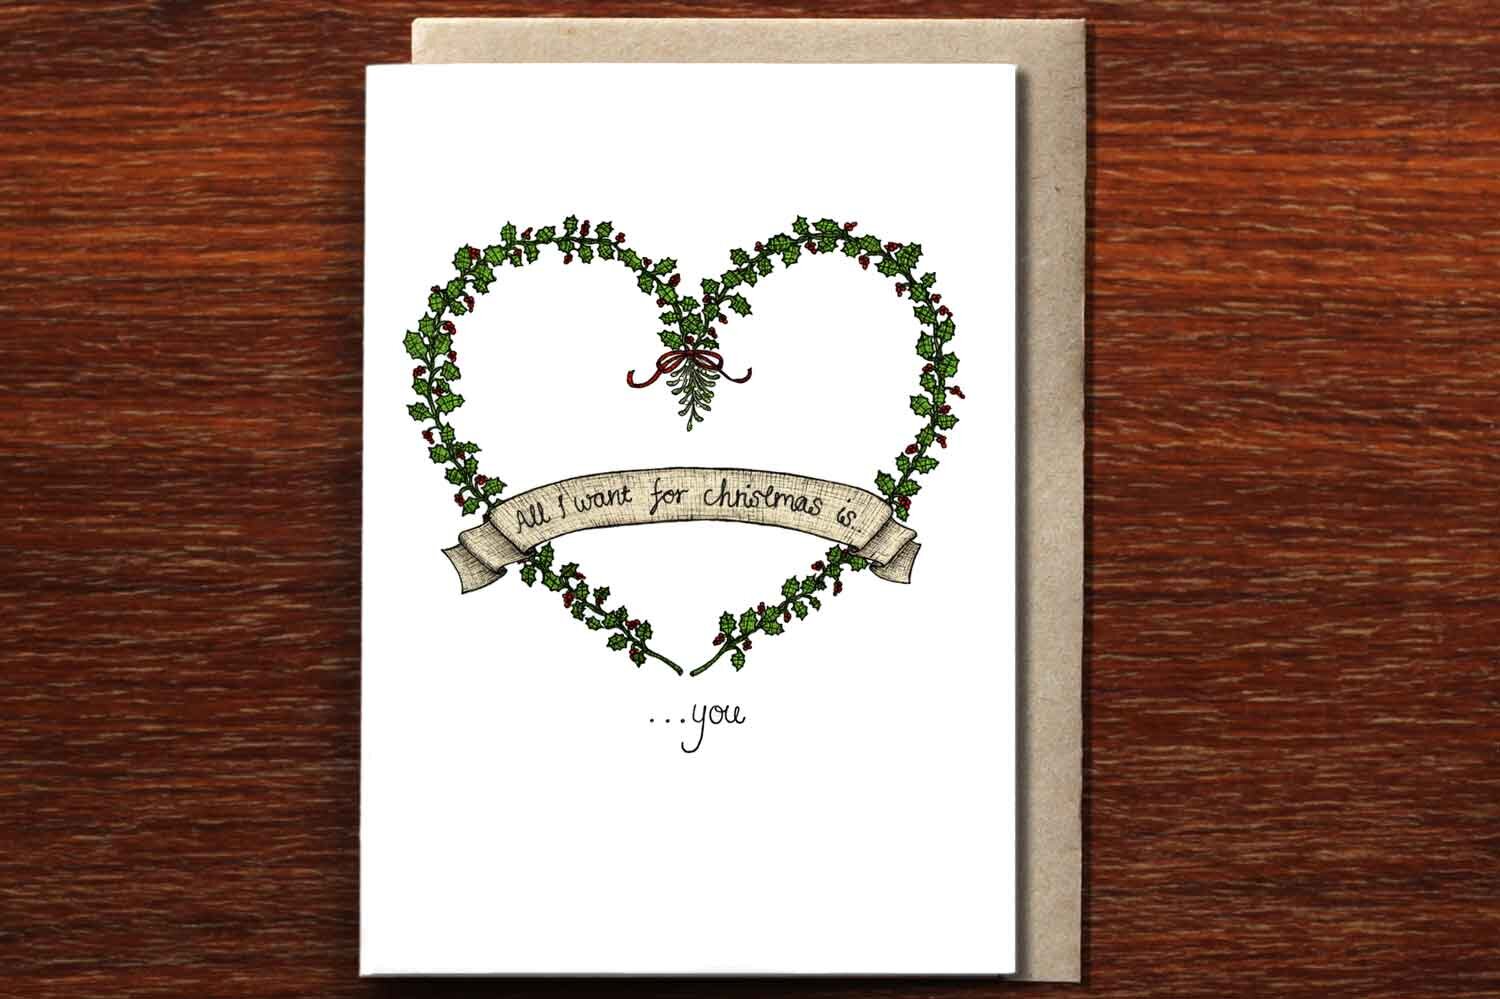 All I Want for Christmas is You - Christmas Card